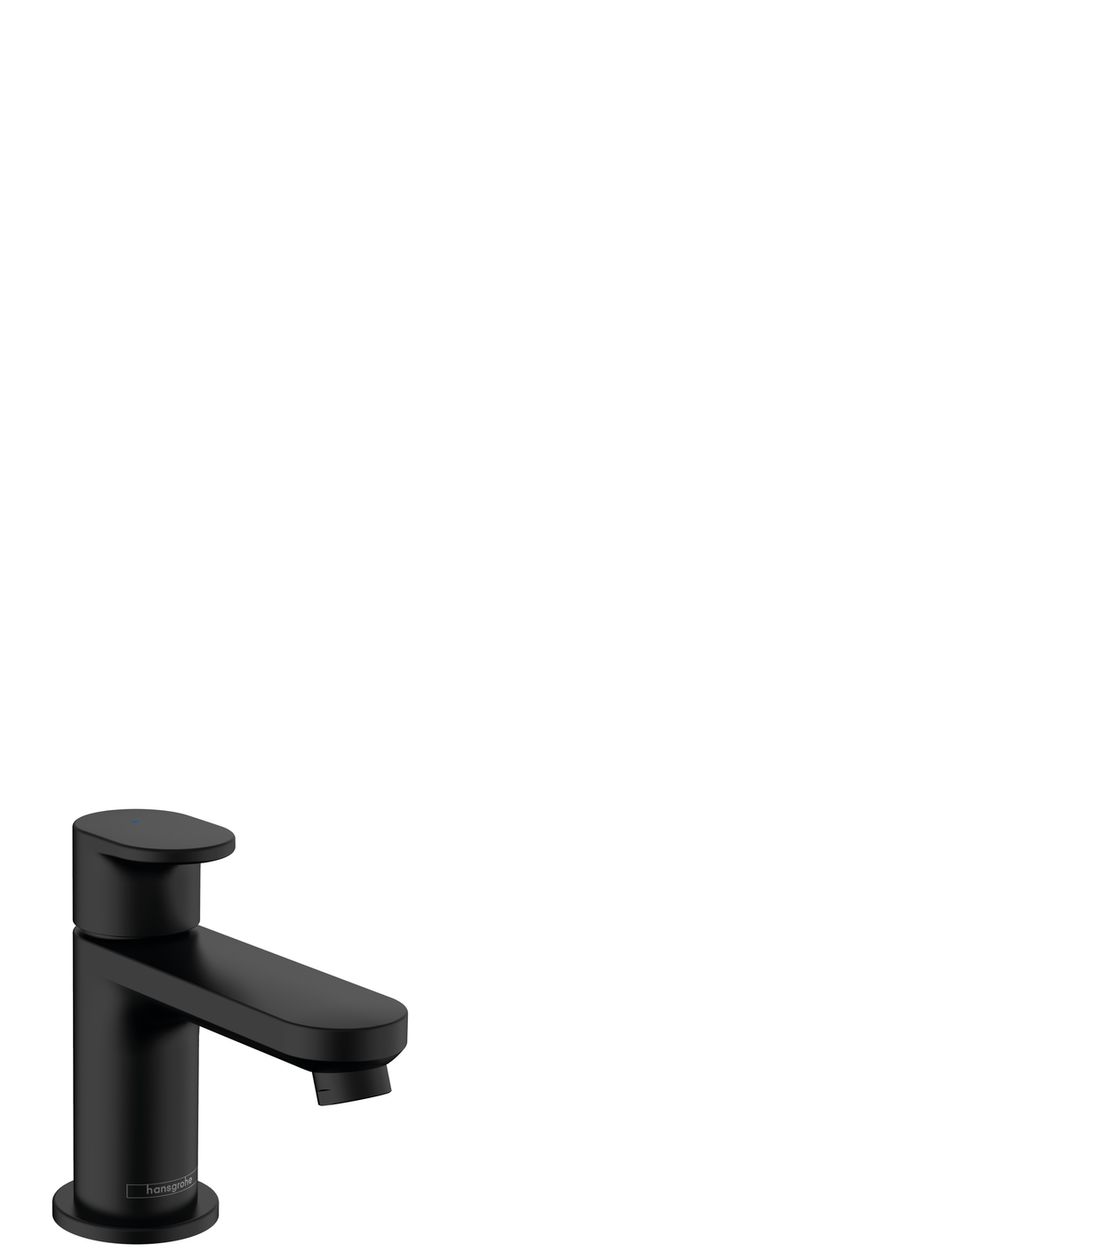 https://isi-sanitaire.fr/media/image/63/92/2b/ISI1234420-1-Robinet-Lave-Mains-Hansgrohe-Vernis-Blend-pour-eau-froide-Noir-Mat-1.jpg